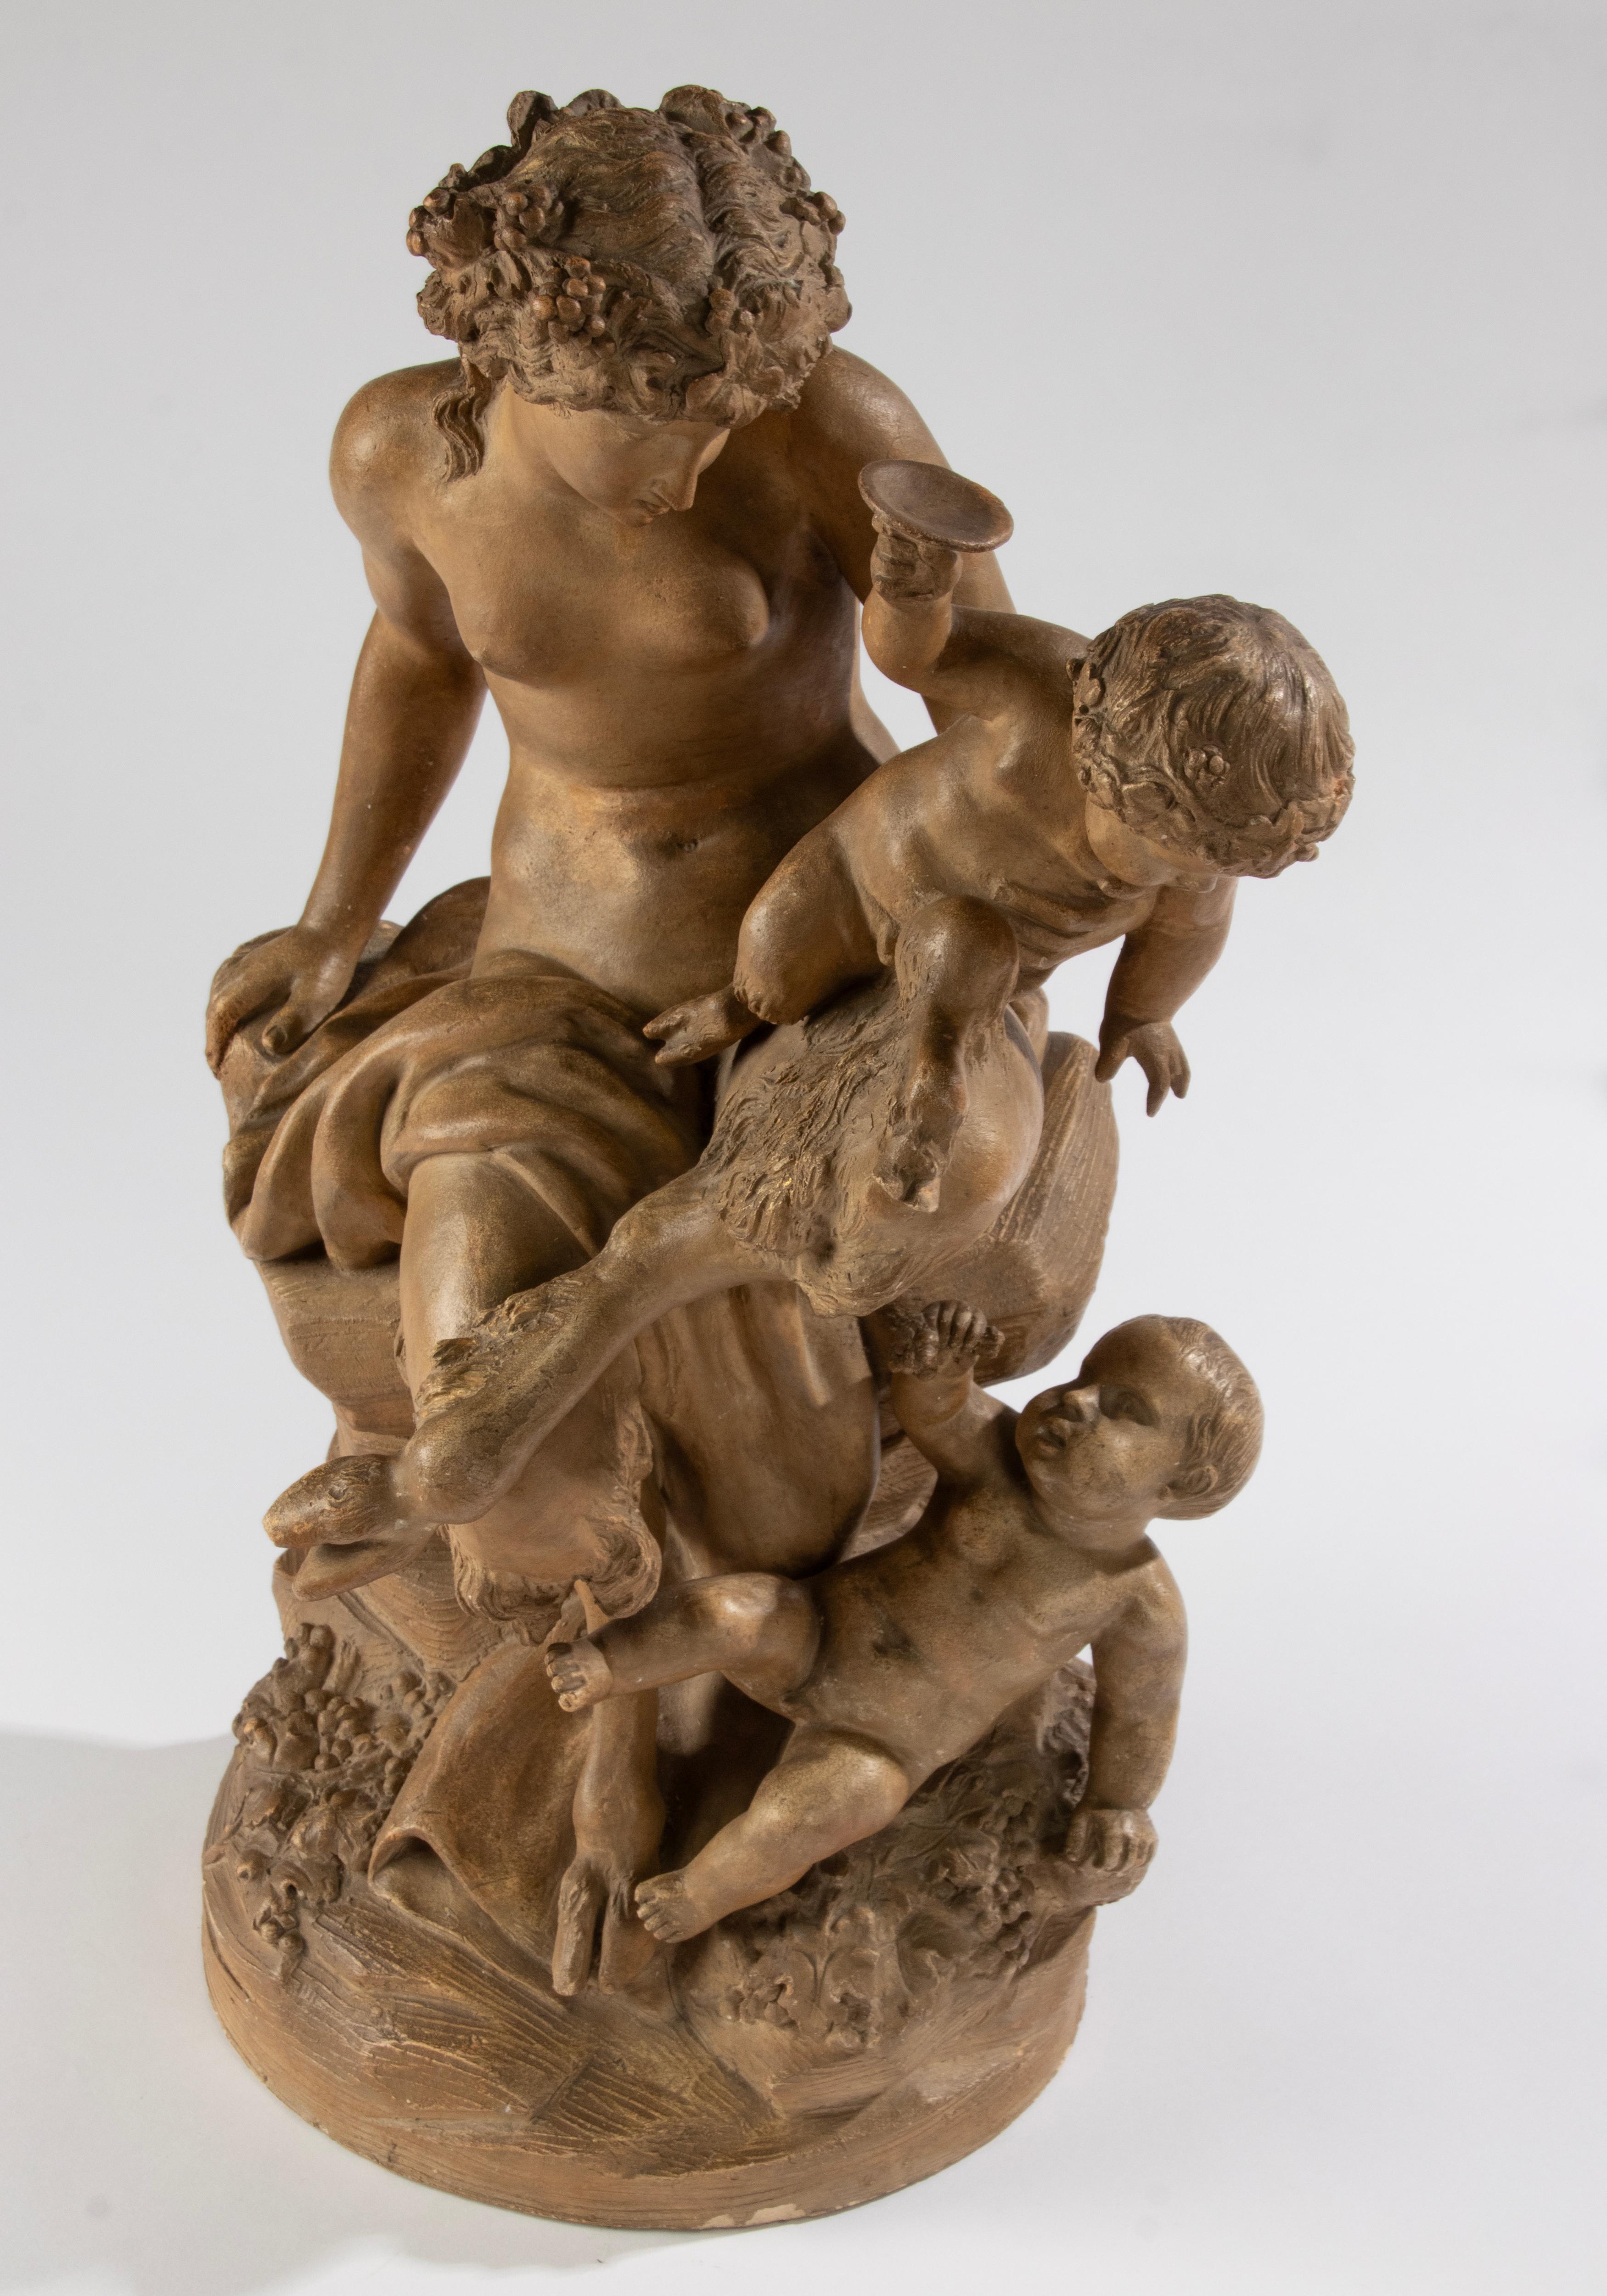 Antique Terracotta Bacchanale Sculpture with Faun and Putti - After Clodion For Sale 2